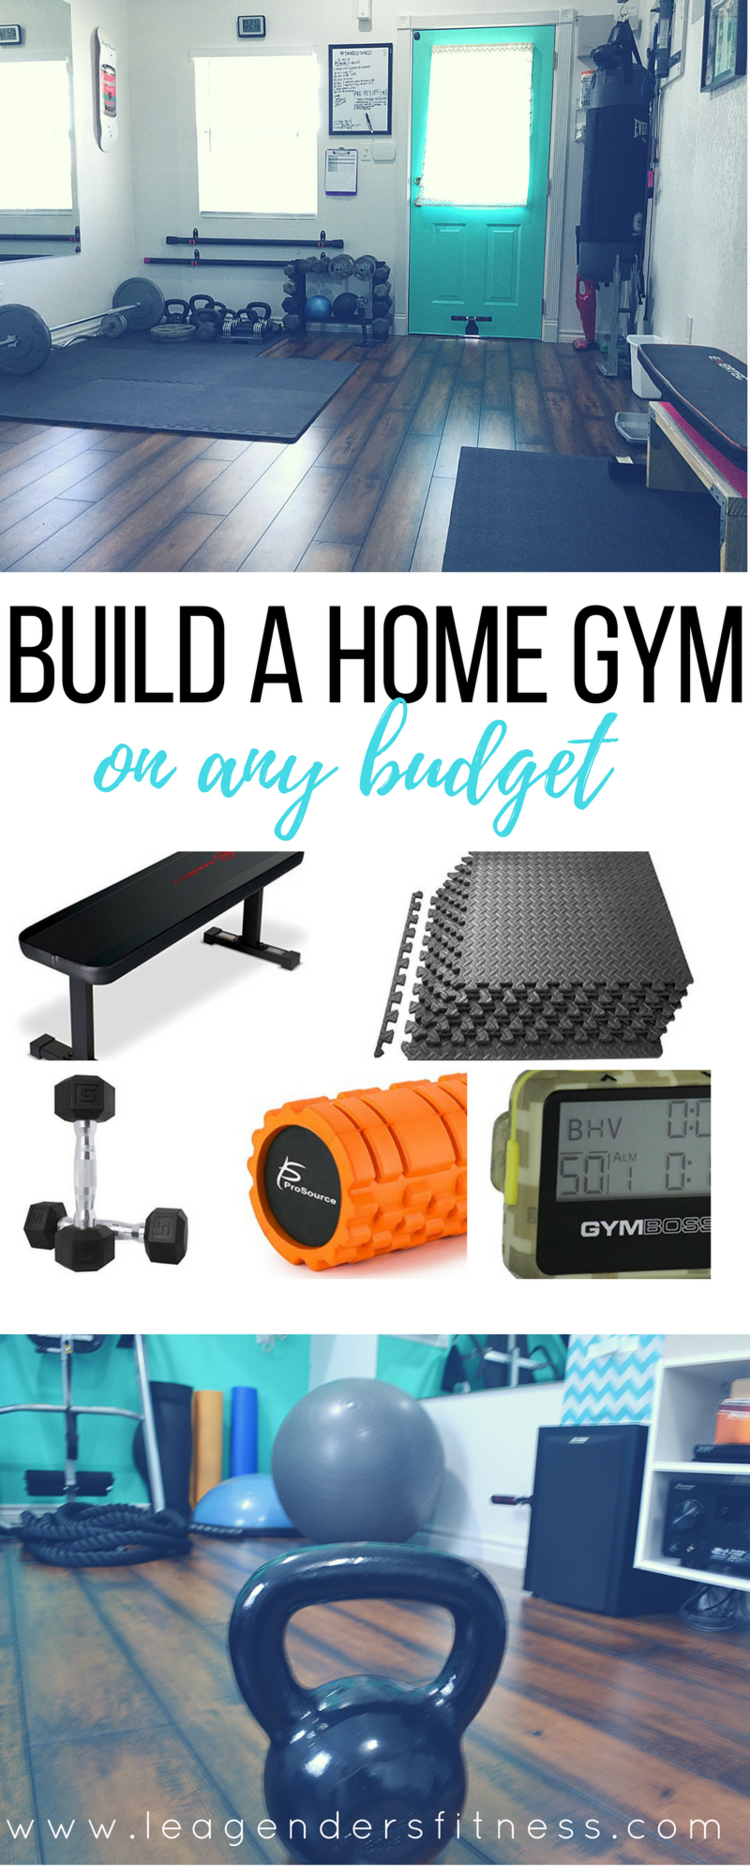 Build a Home Gym on any Budget — Lea Genders Fitness - Build a Home Gym on any Budget — Lea Genders Fitness -   20 fitness Room plan ideas